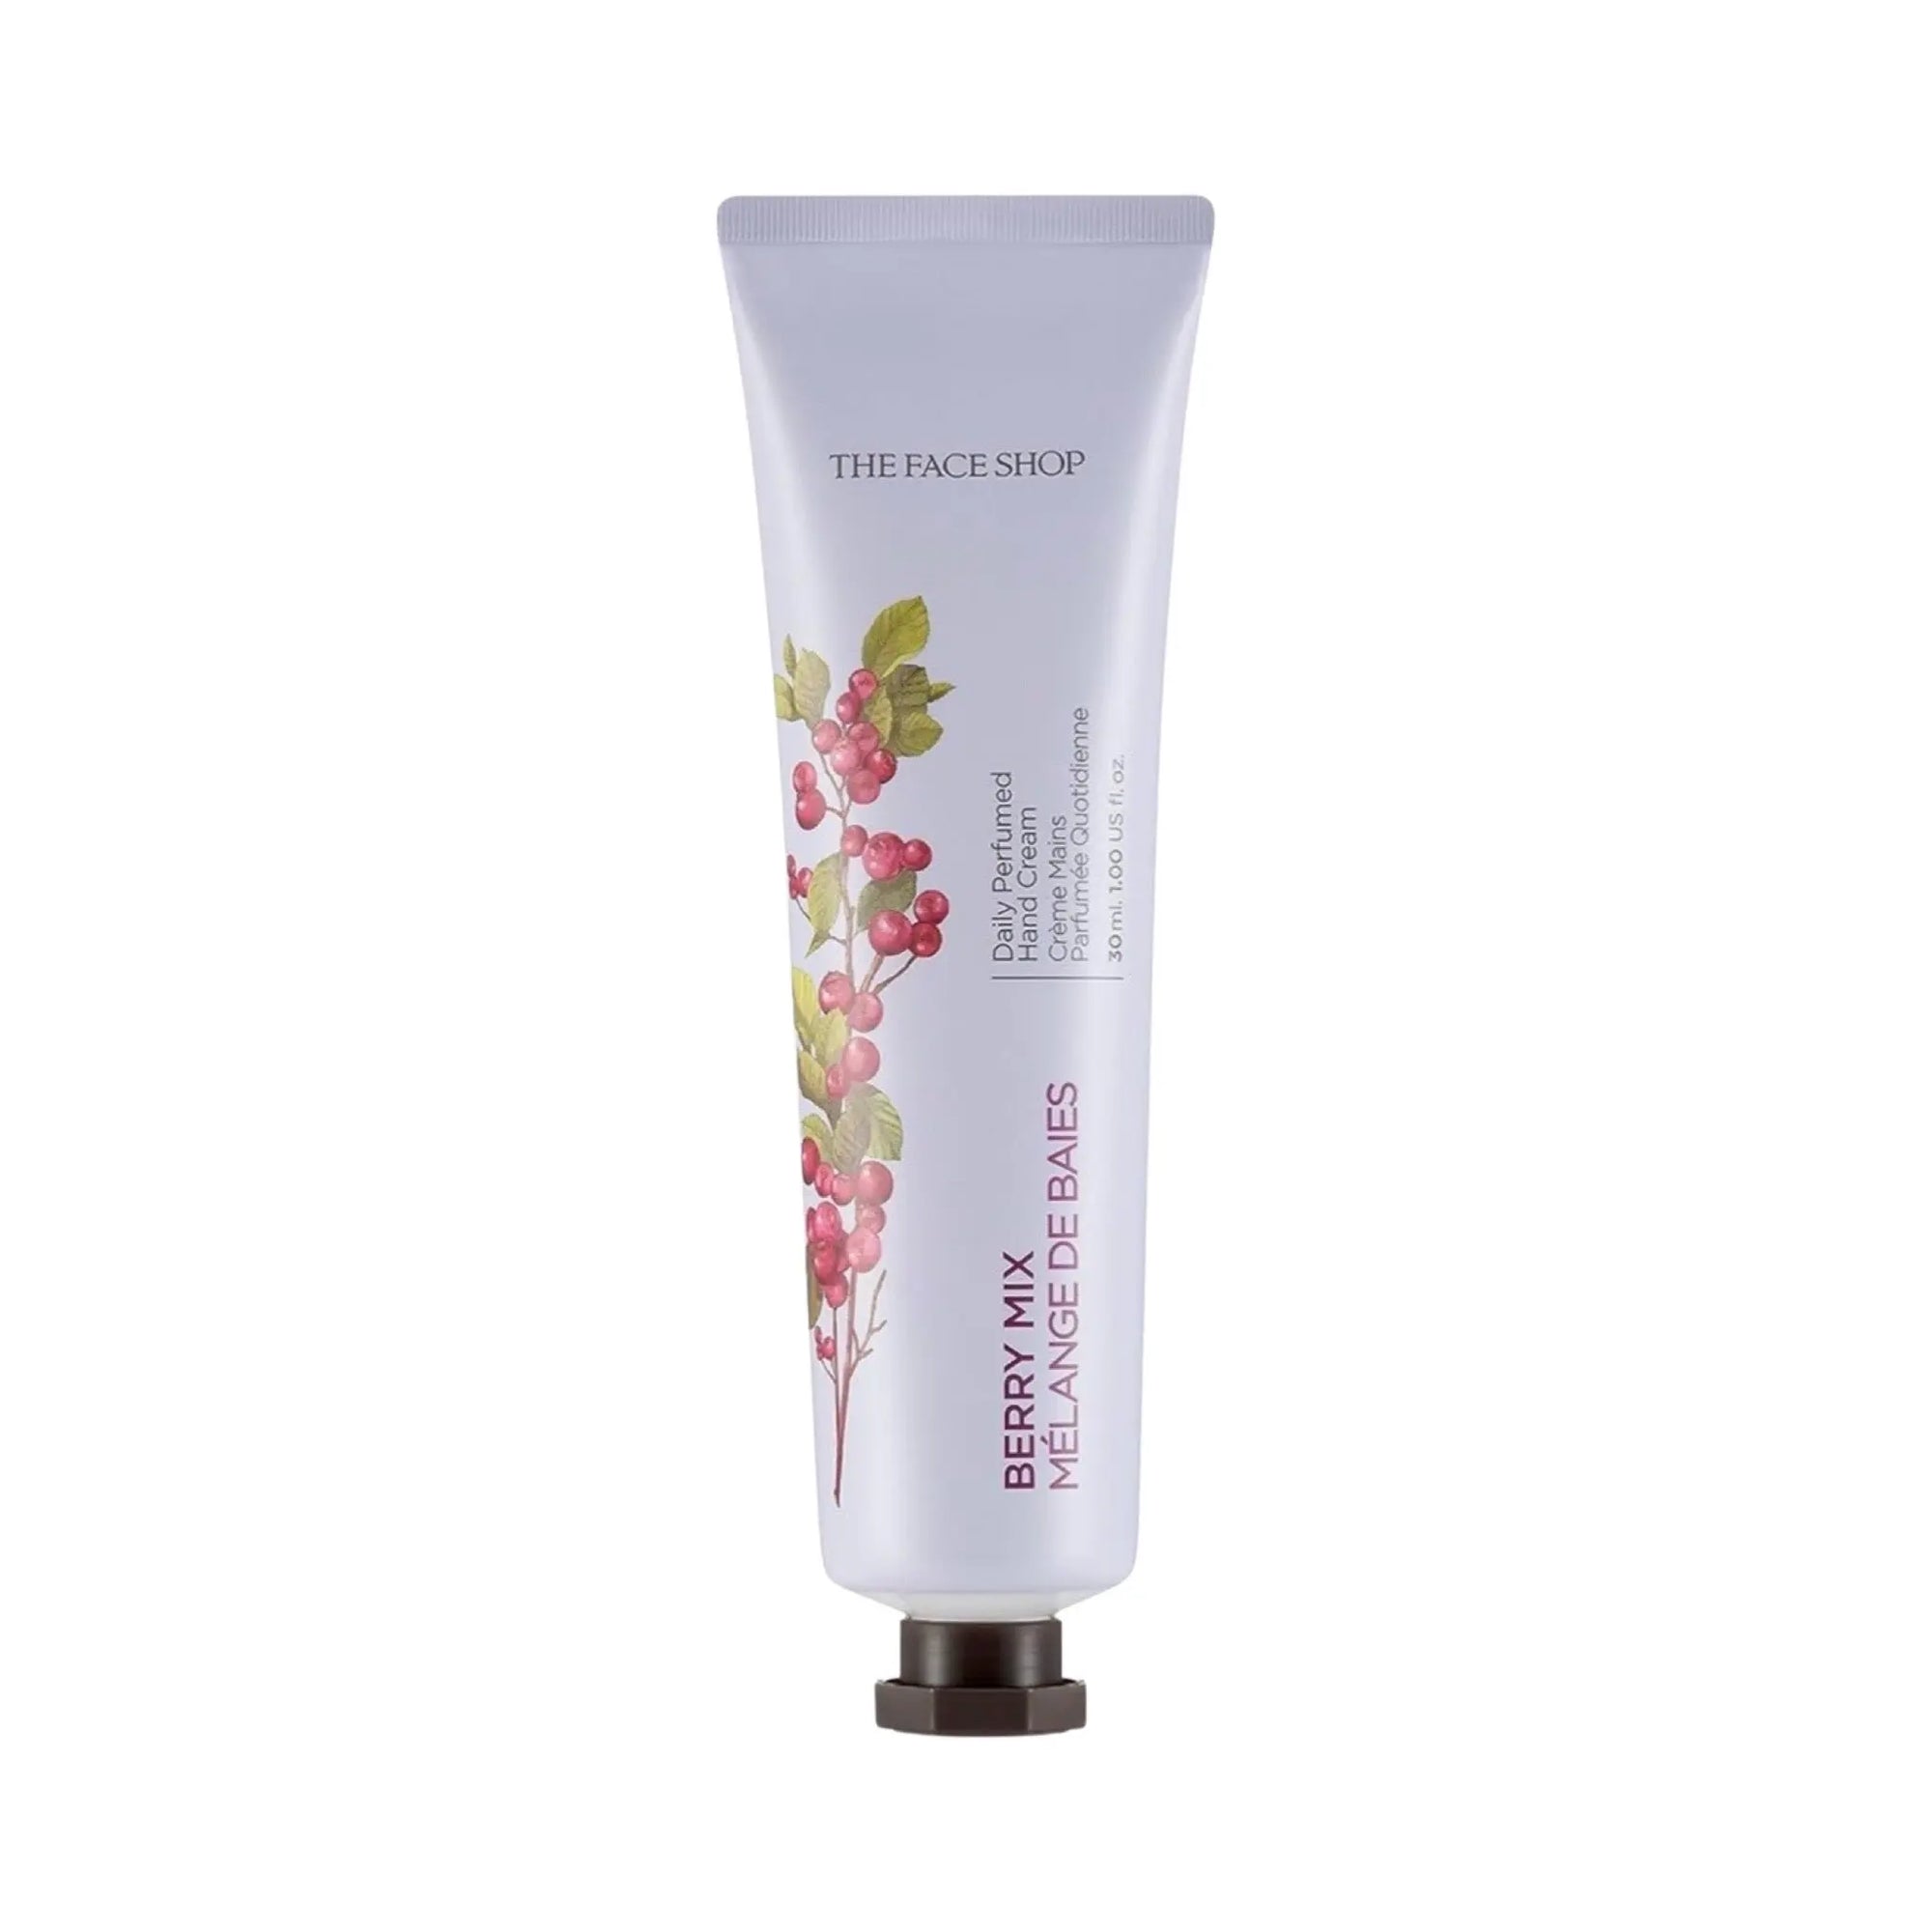 The Face Shop - Daily Perfumed Hand Cream 04 (Berry Mix) 30mL